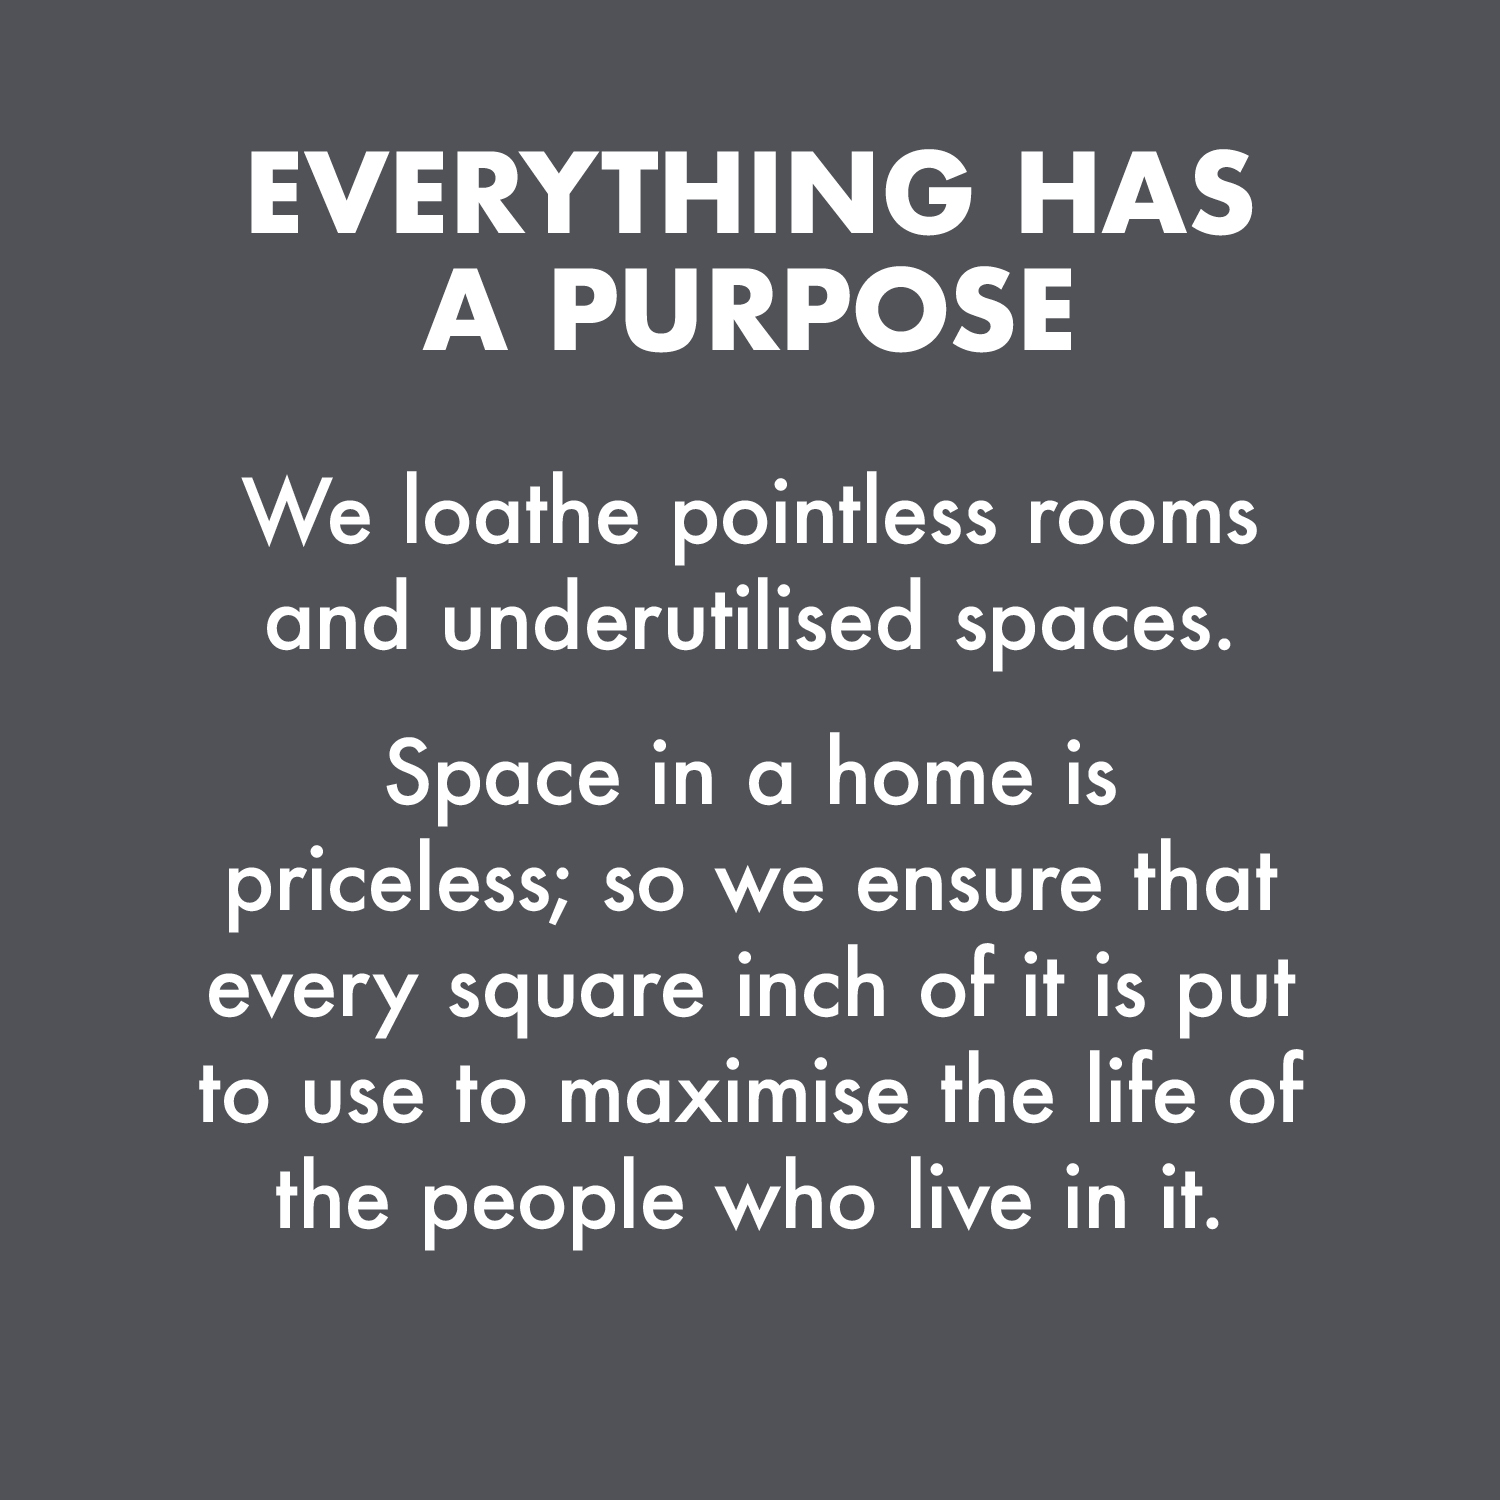 Everything has a purpose graphic